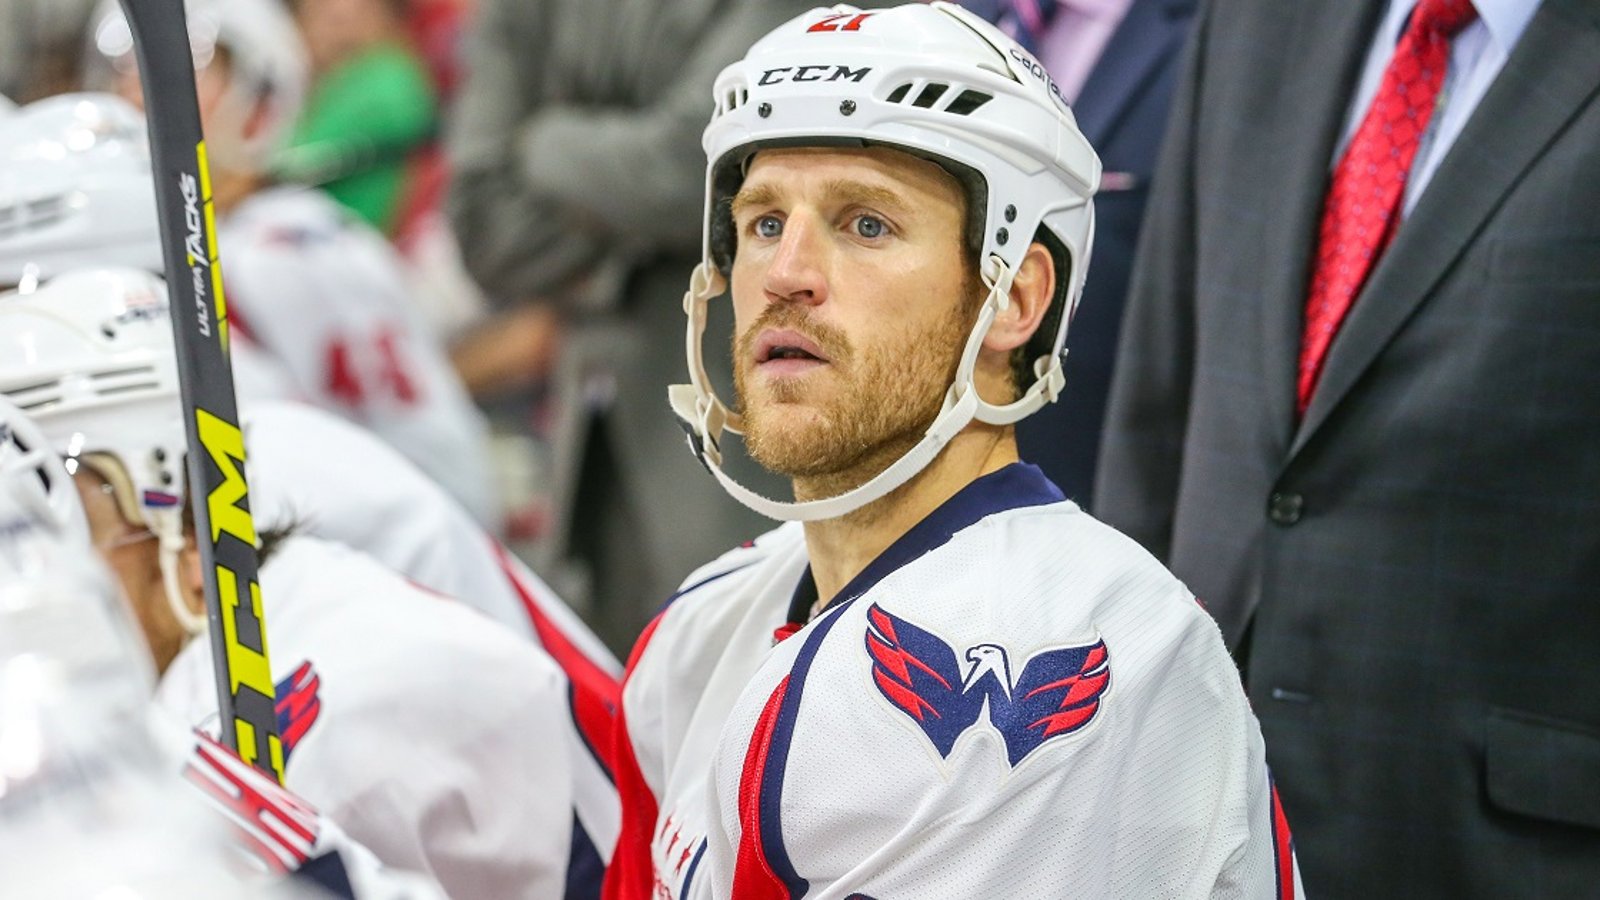 Brooks Laich calls out NHL players for making a “mockery” of the game.